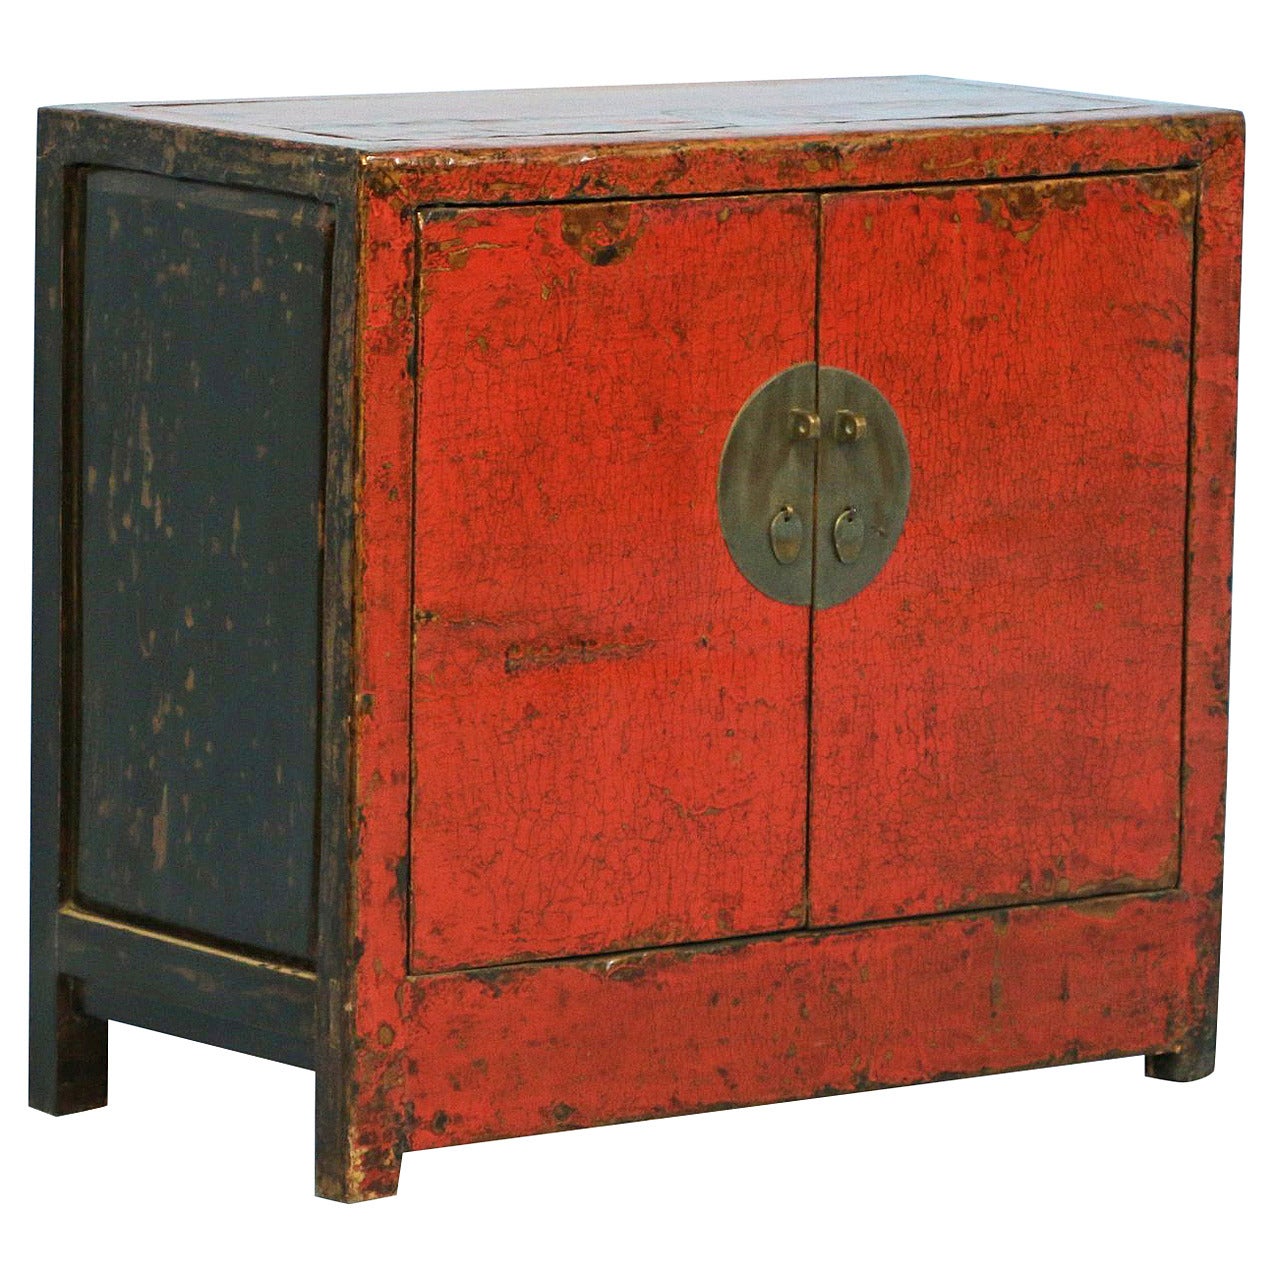 Antique Striking Red Painted Lacquered Chinese Sideboard, circa 1800s